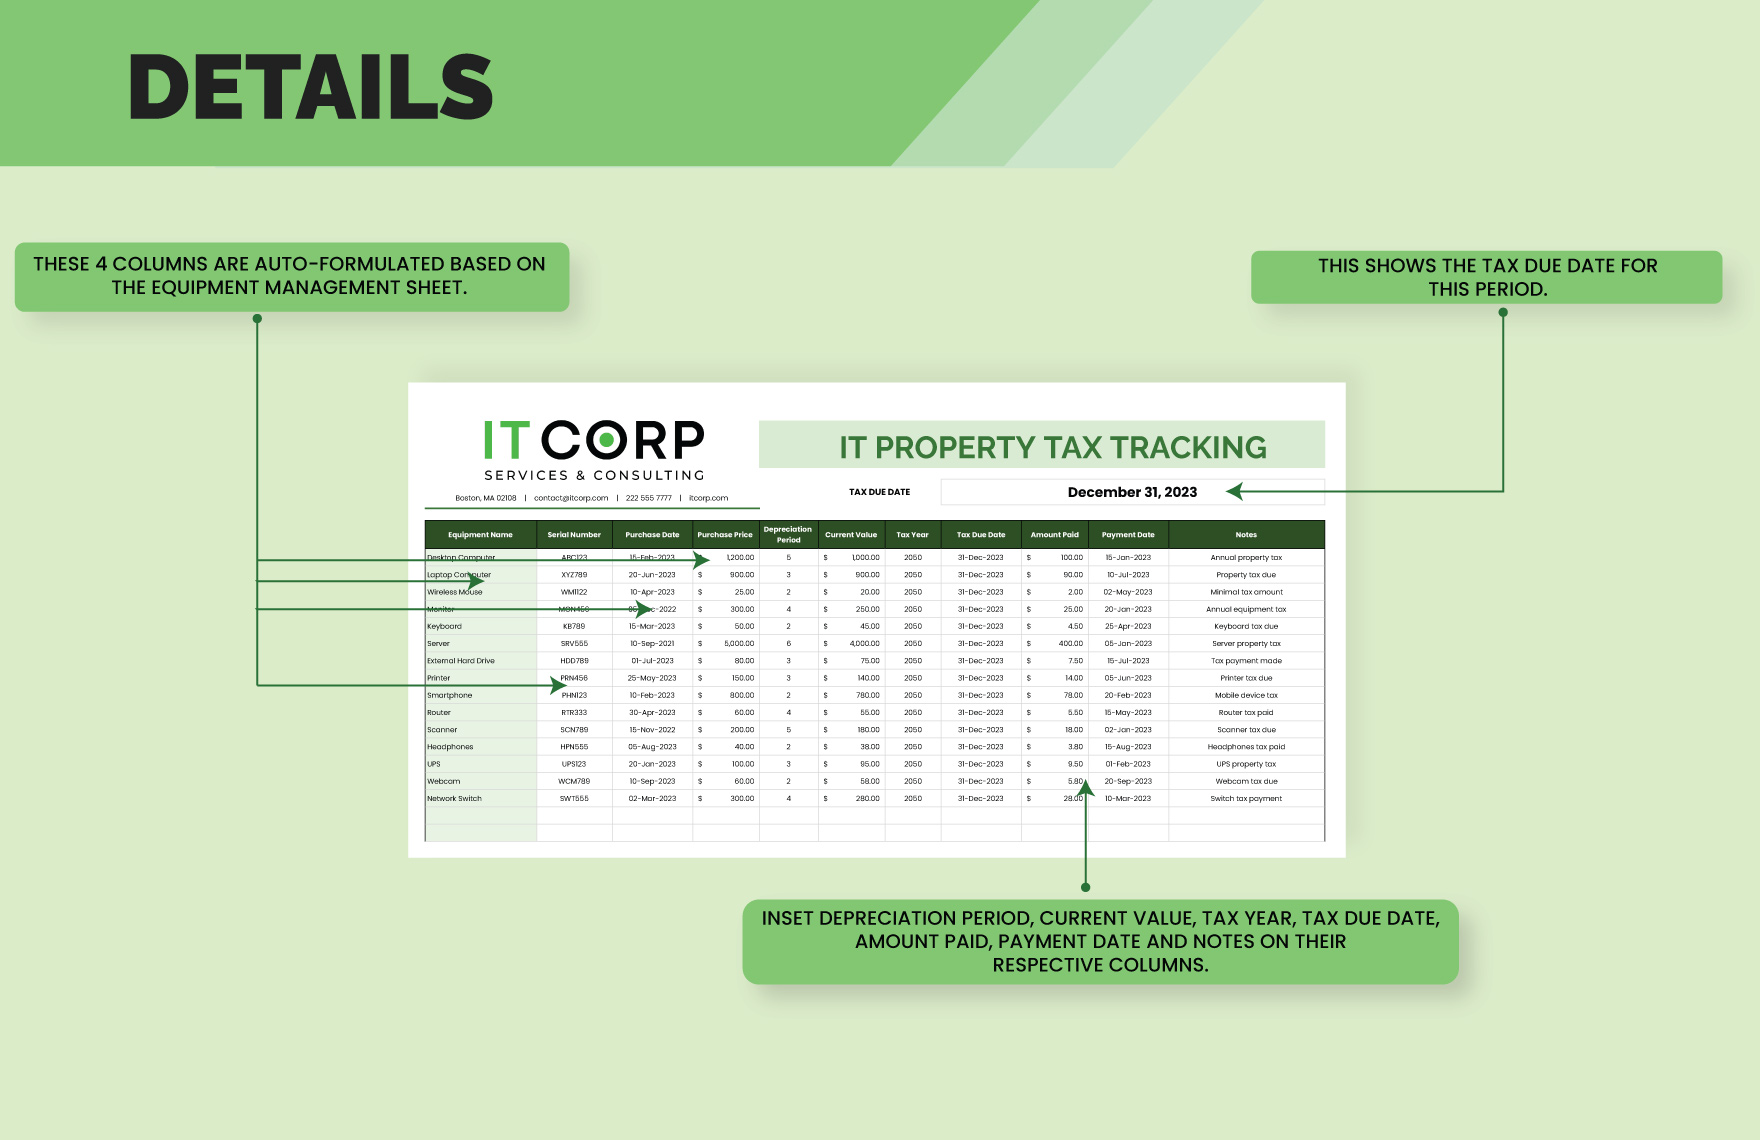 IT Property Tax Tracking Sheet Template